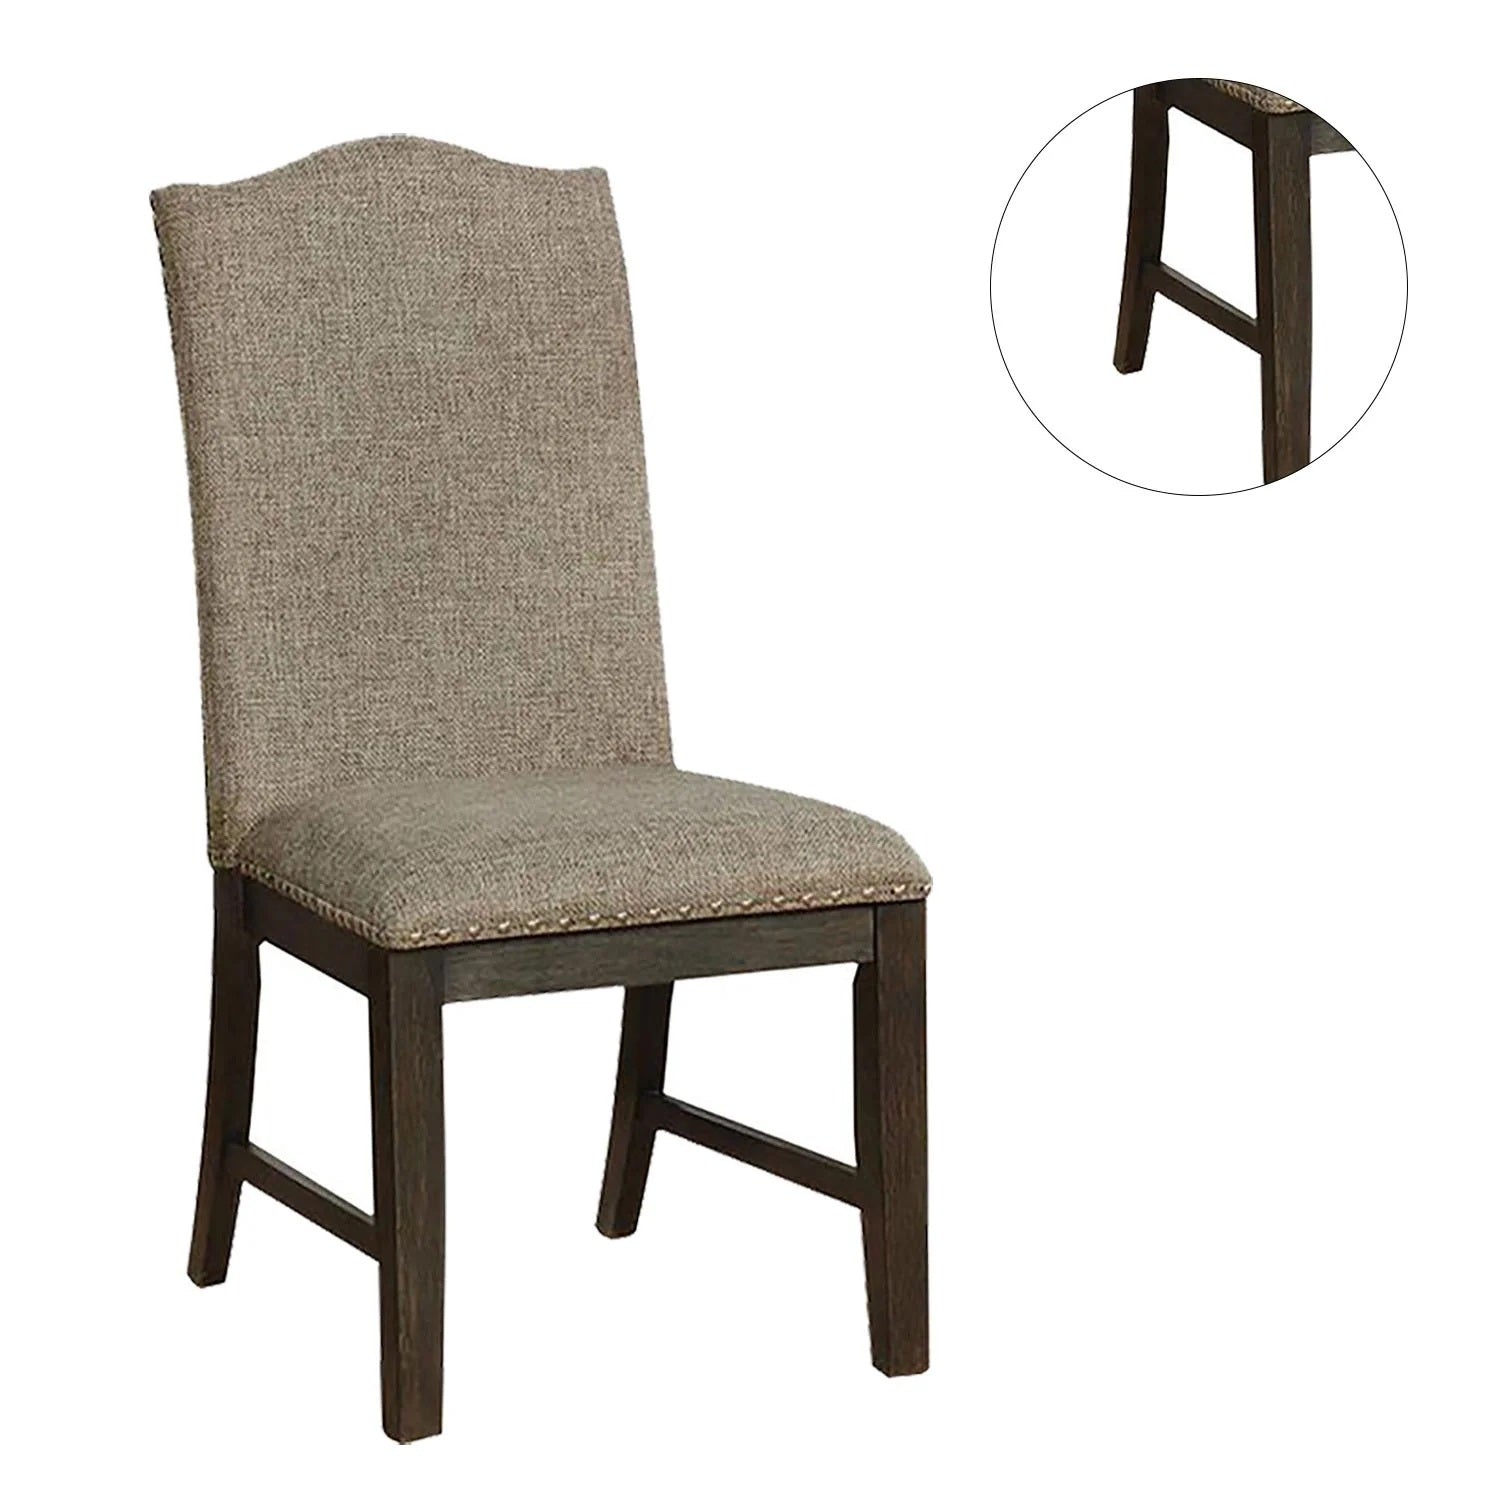 Transitional Set of 2 Side Chairs Espresso Warm Gray espresso-dining room-contemporary-modern-dining